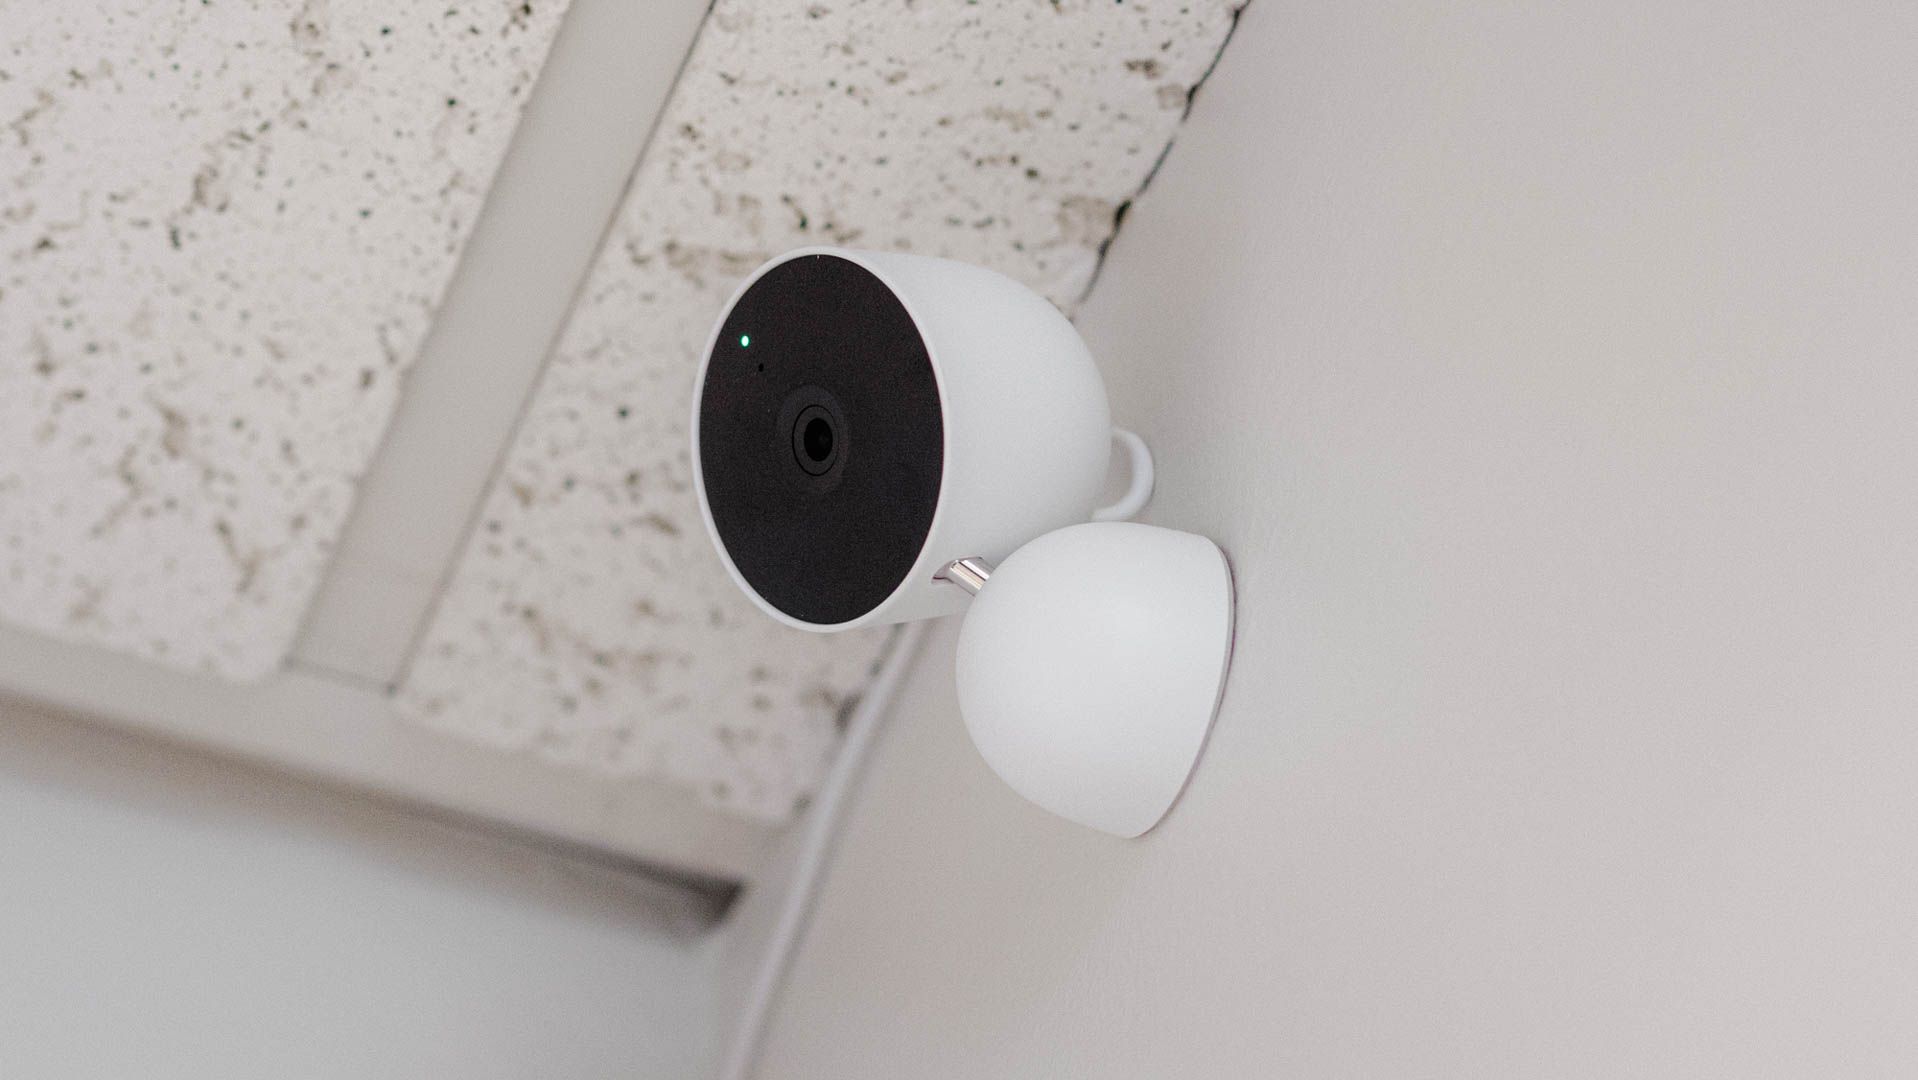 Google Nest indoor security camera mounted to a wall